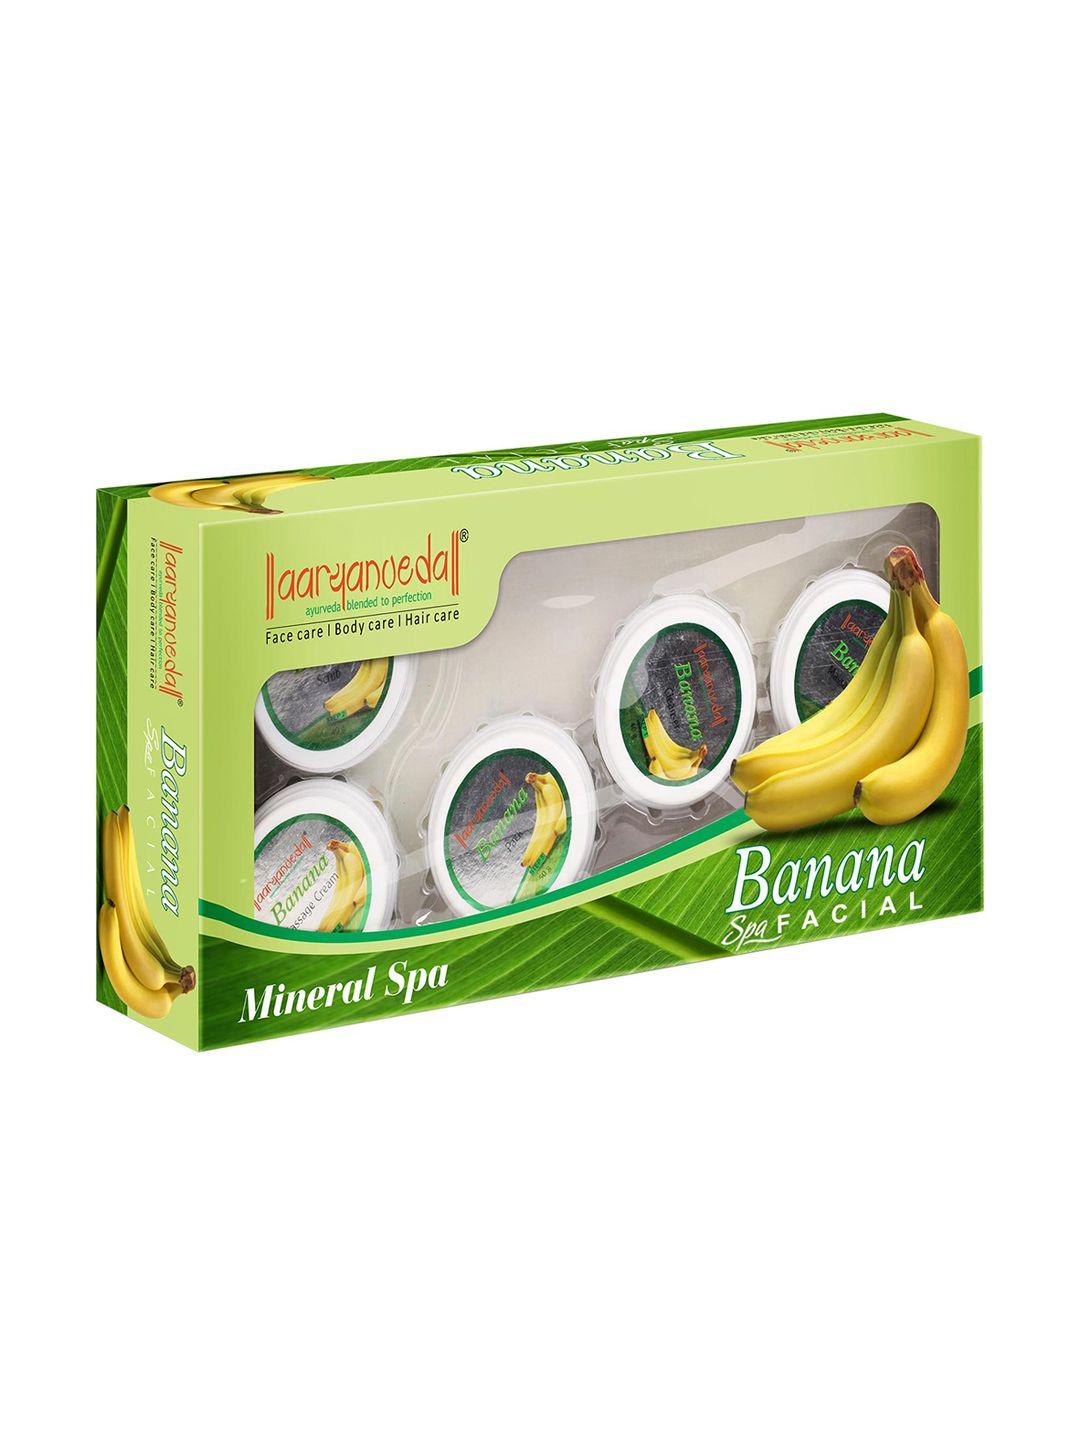 aryanveda banana spa facial kit for instant party glow with banana & olive oil - 210 g